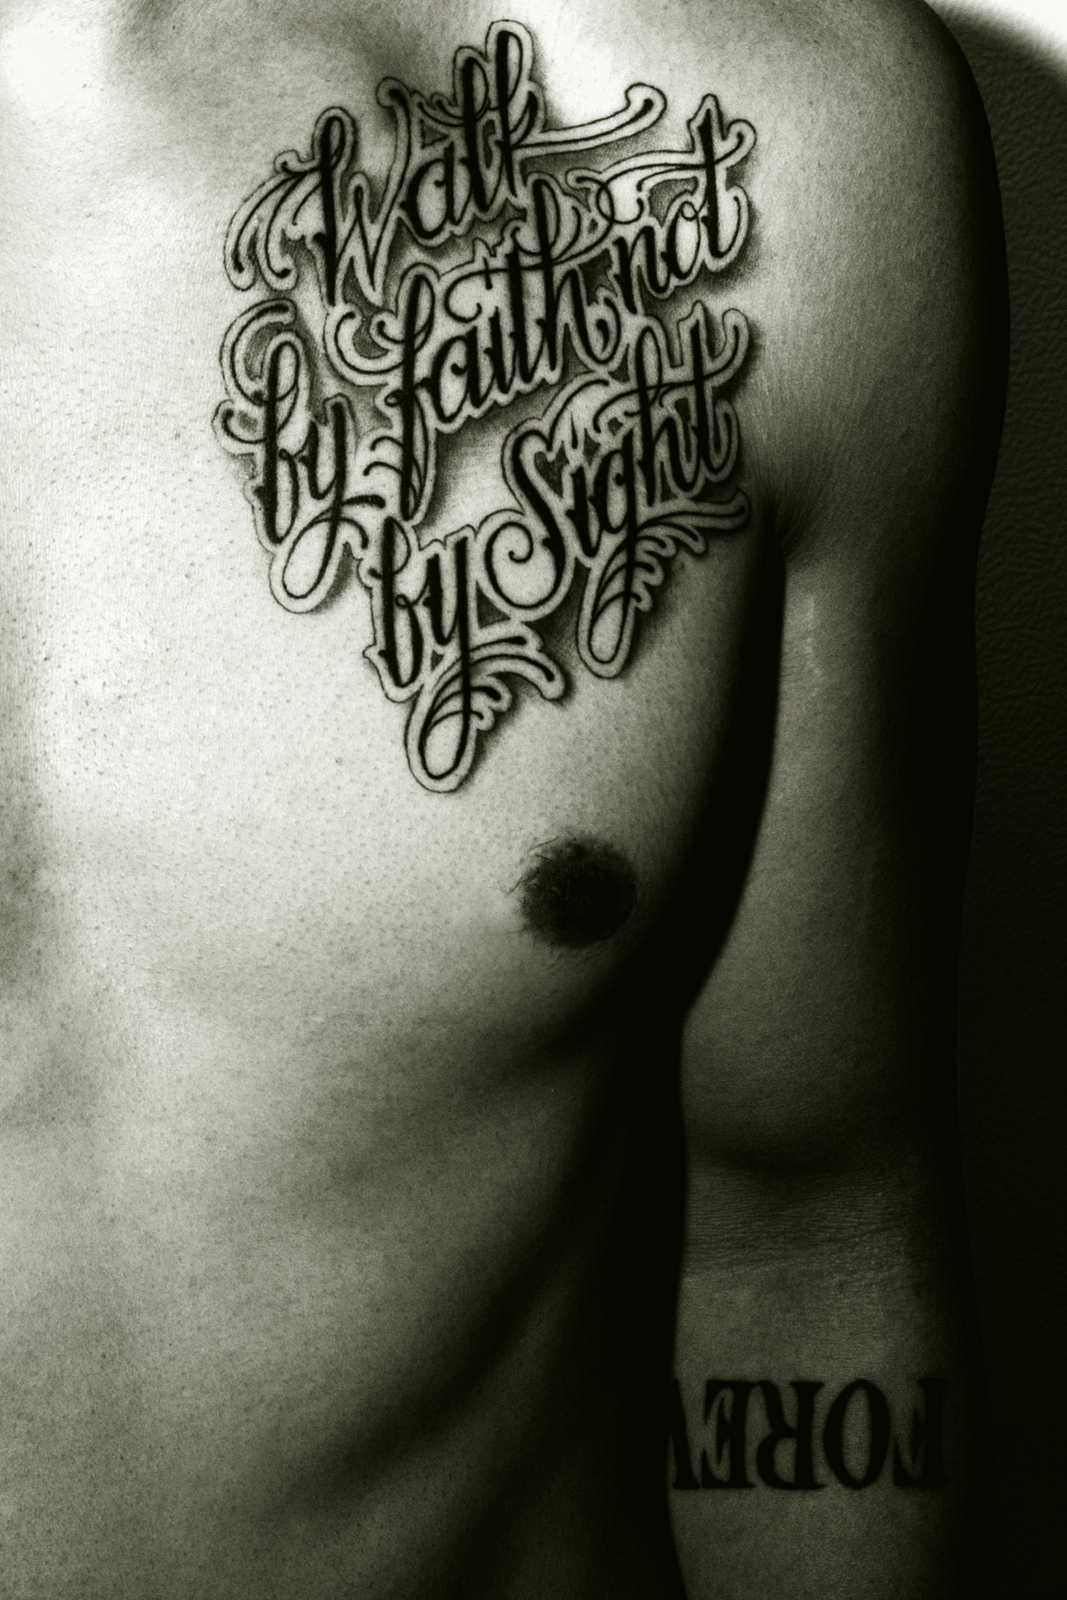 Walk By Faith Not By Sight Tattoo On Arm • Arm Tattoo Sites.